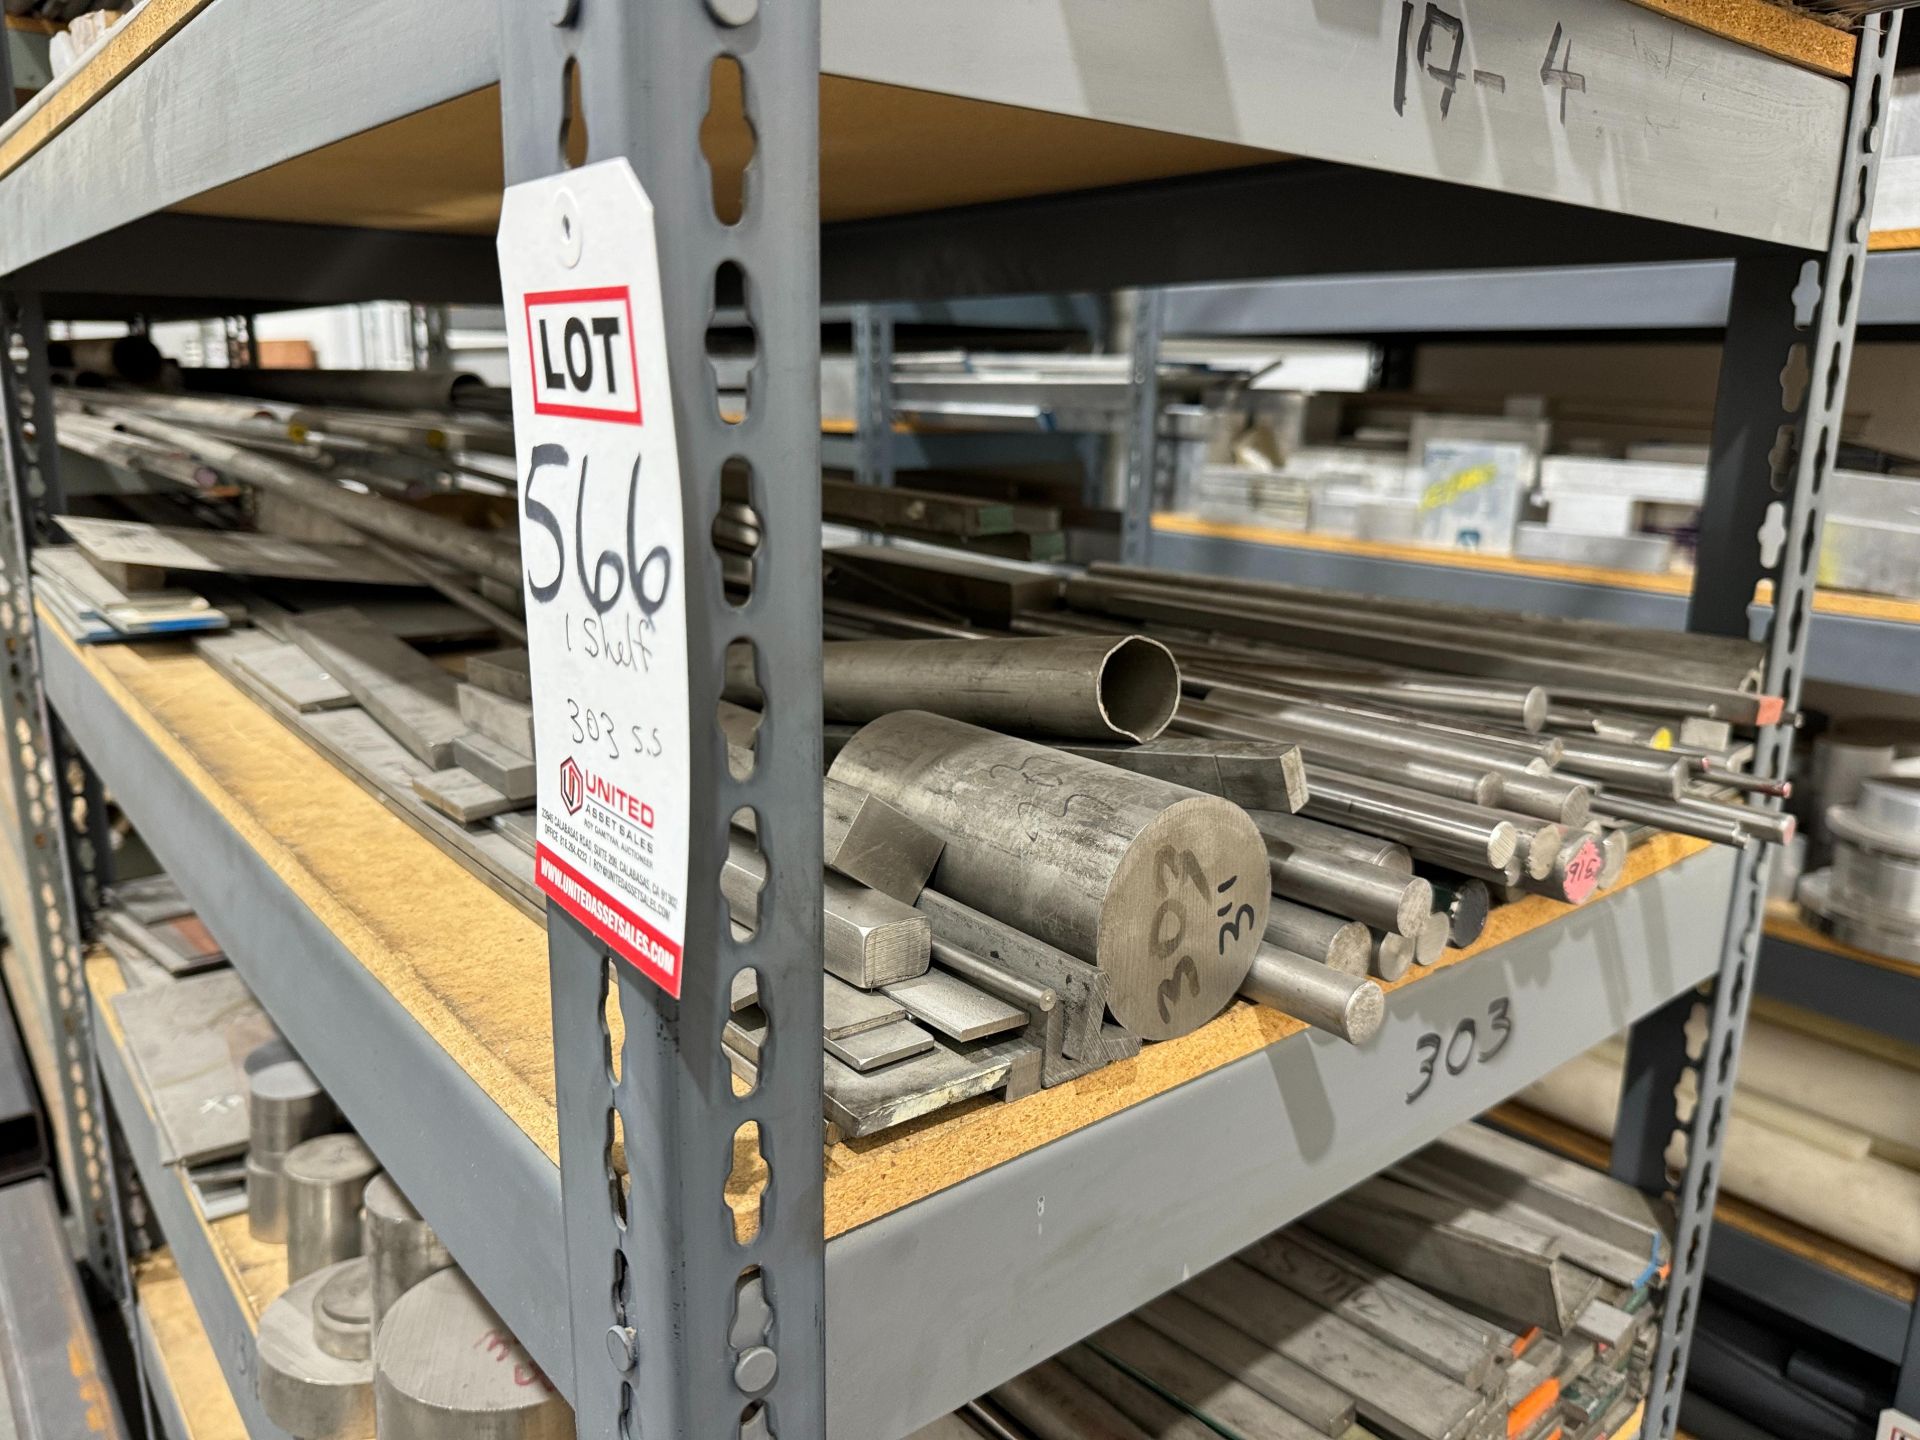 LOT - CONTENTS OF (1) 4' X 2' SHELF: 304 STAINLESS STEEL